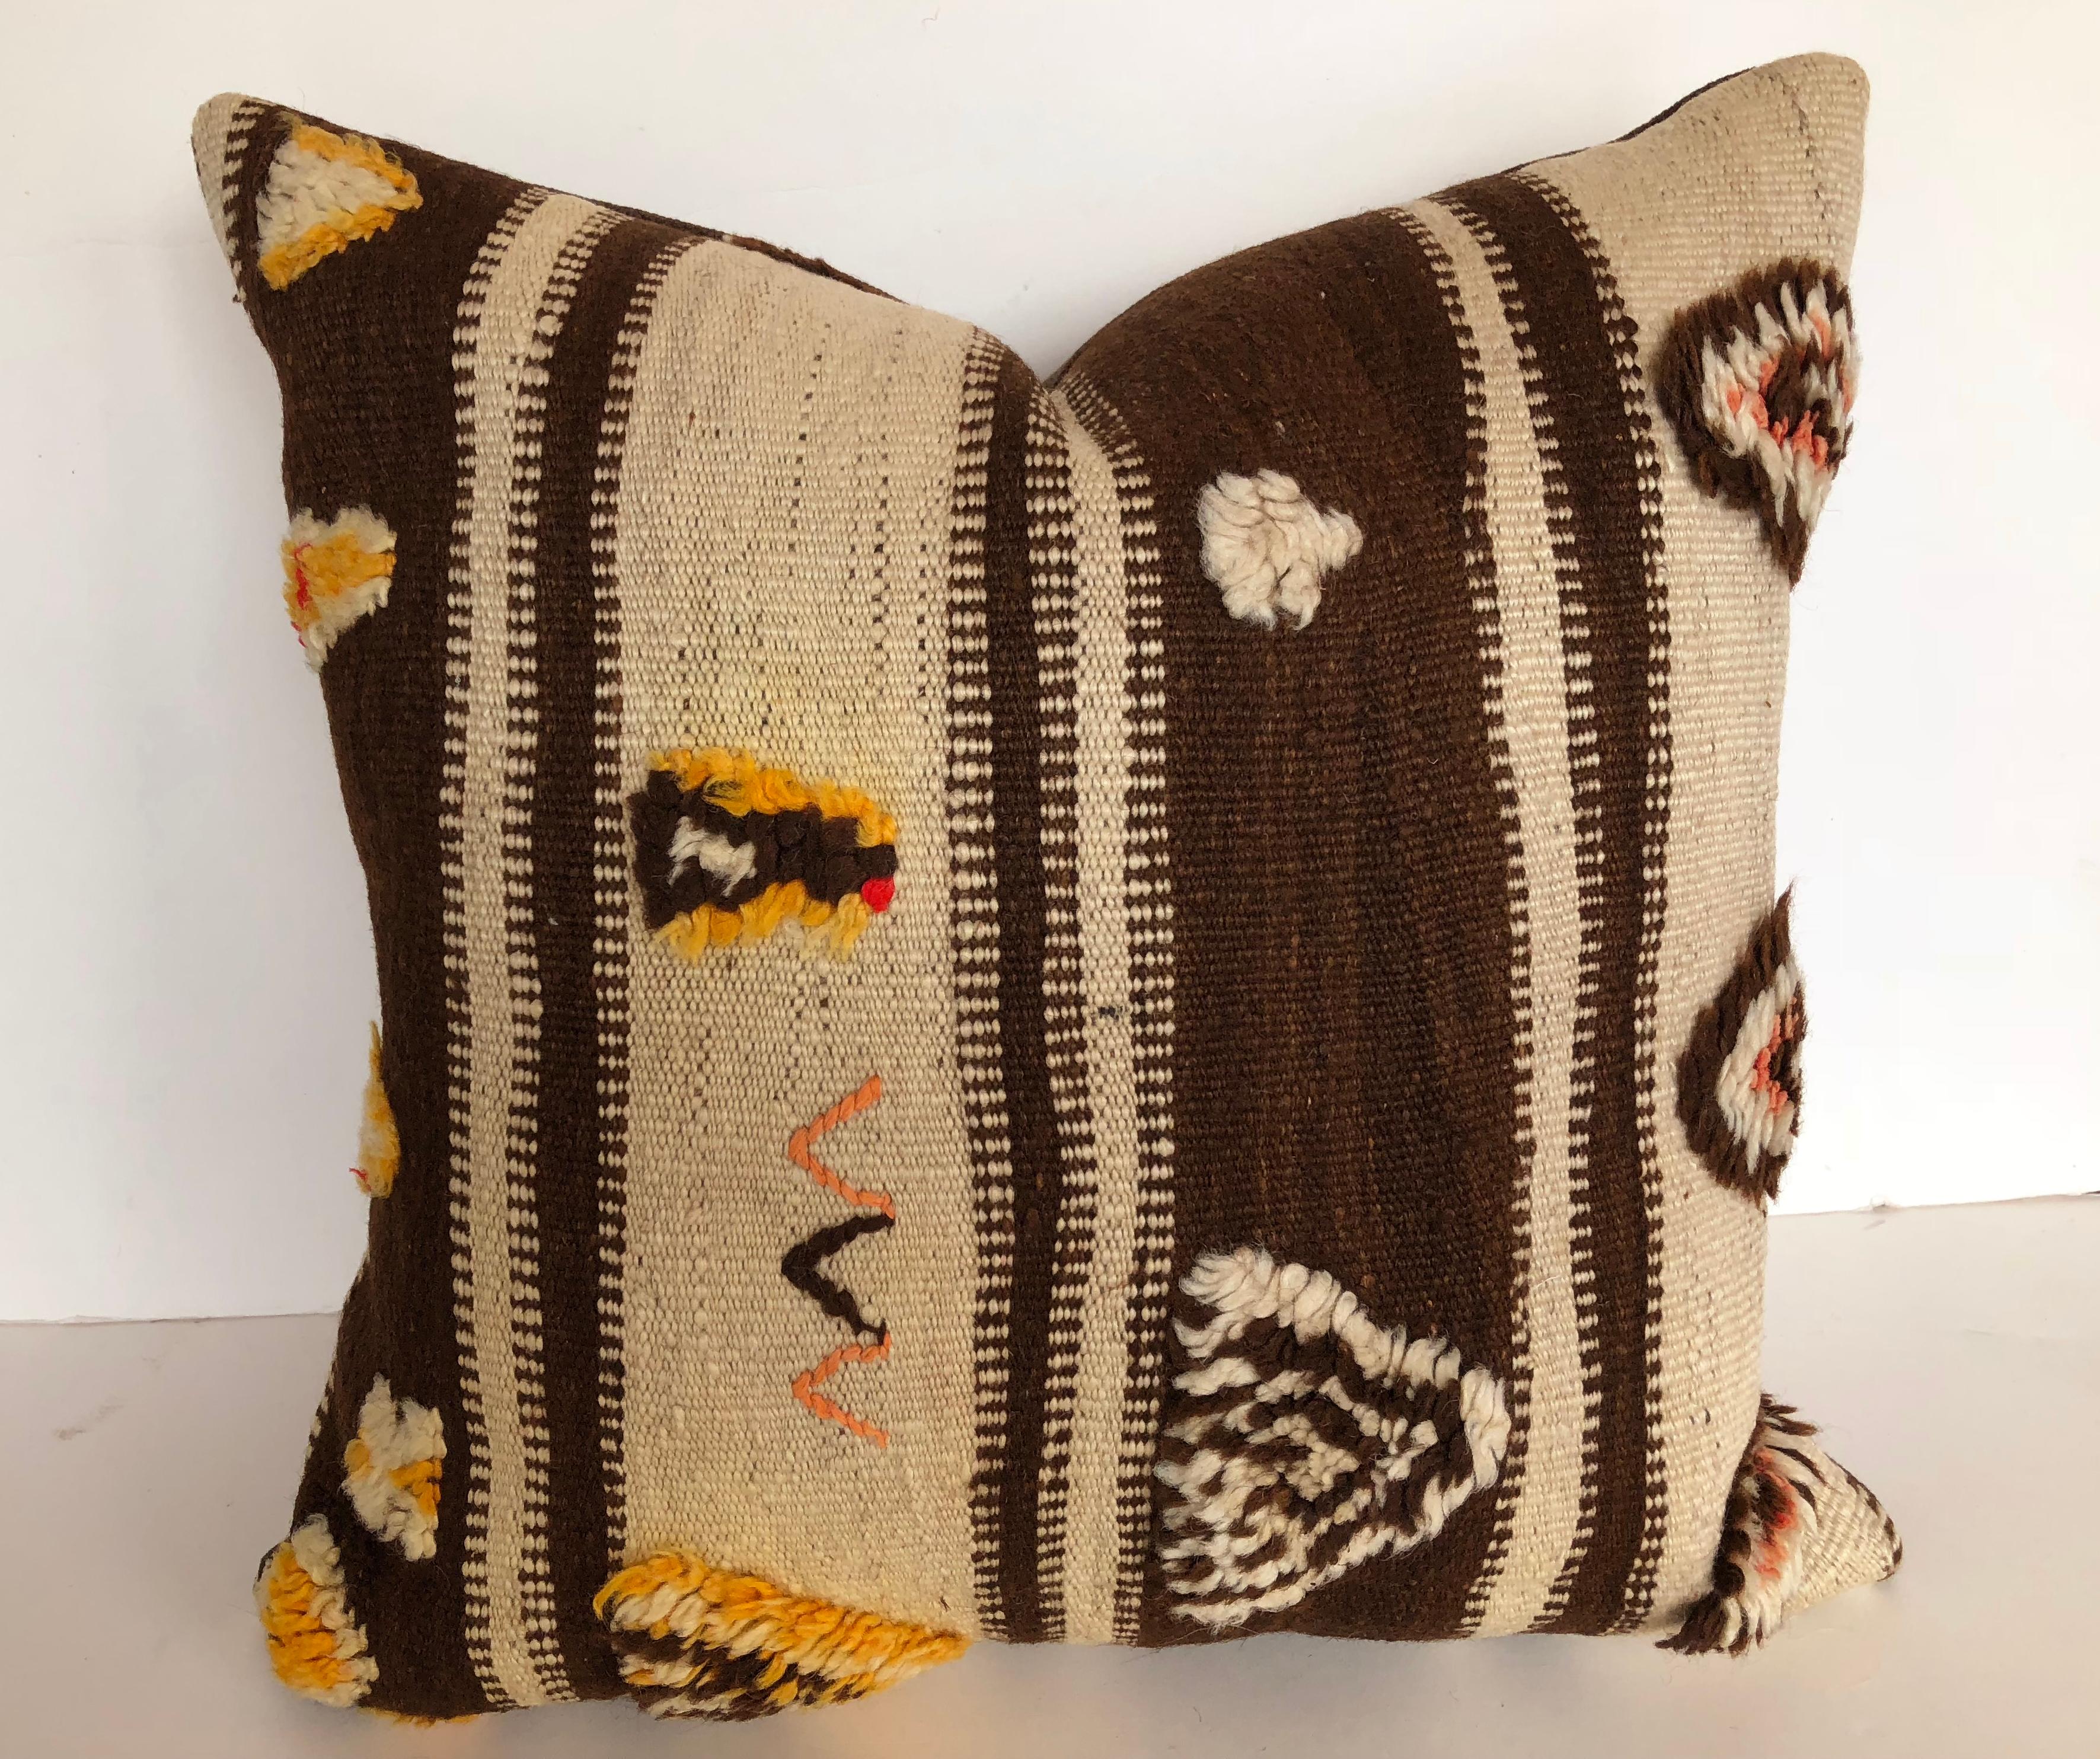 Custom pillow cut from a vintage hand loomed wool Moroccan Berber rug from the Atlas Mountains. Wool stripes are soft and lustrous with tufted wool tribal designs. Pillow is backed in dark brown linen blend, filled with an insert of 50/50 down and